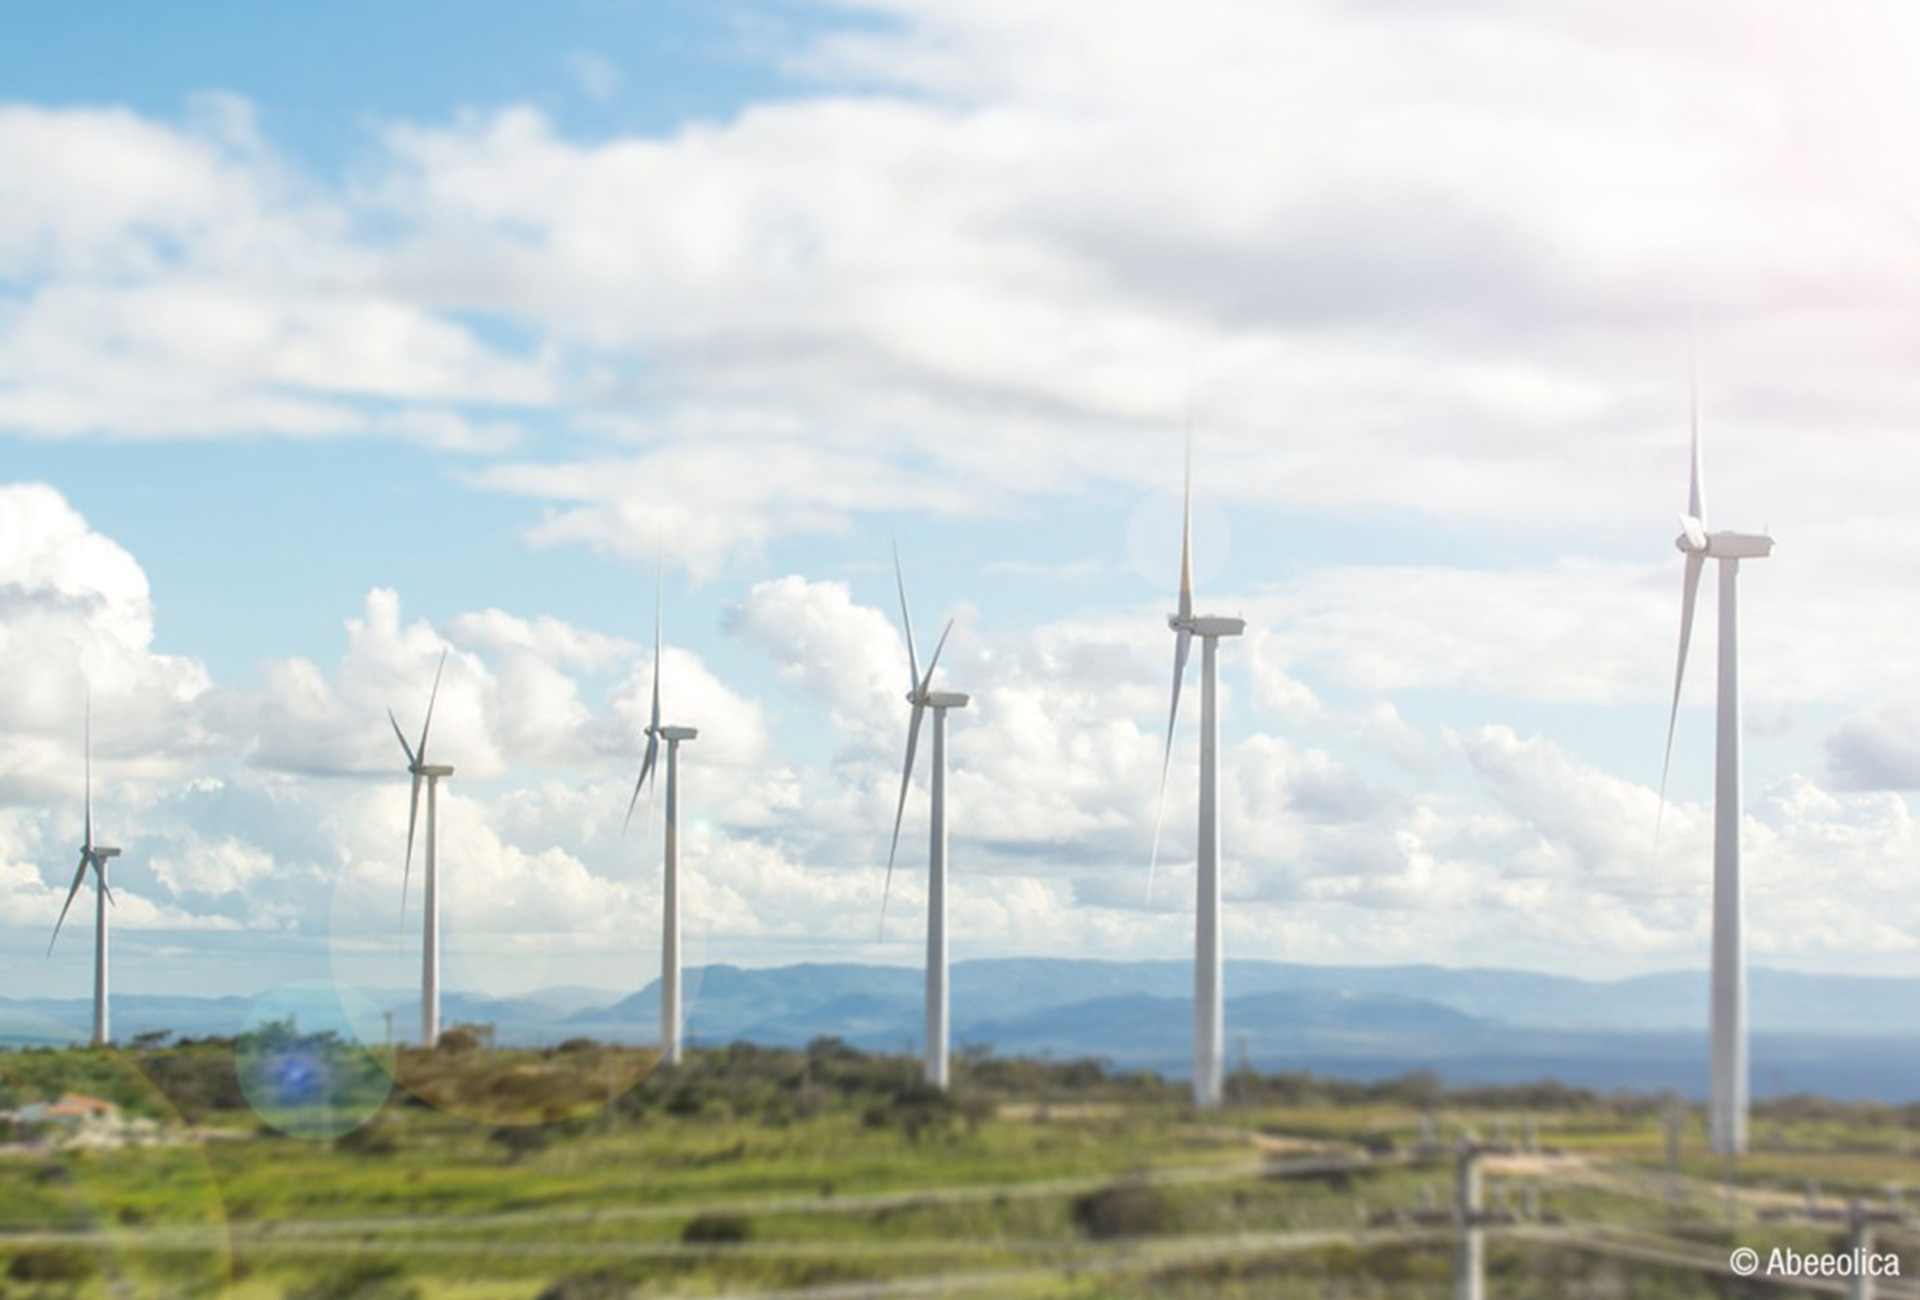 A view of 6 wind turbines 